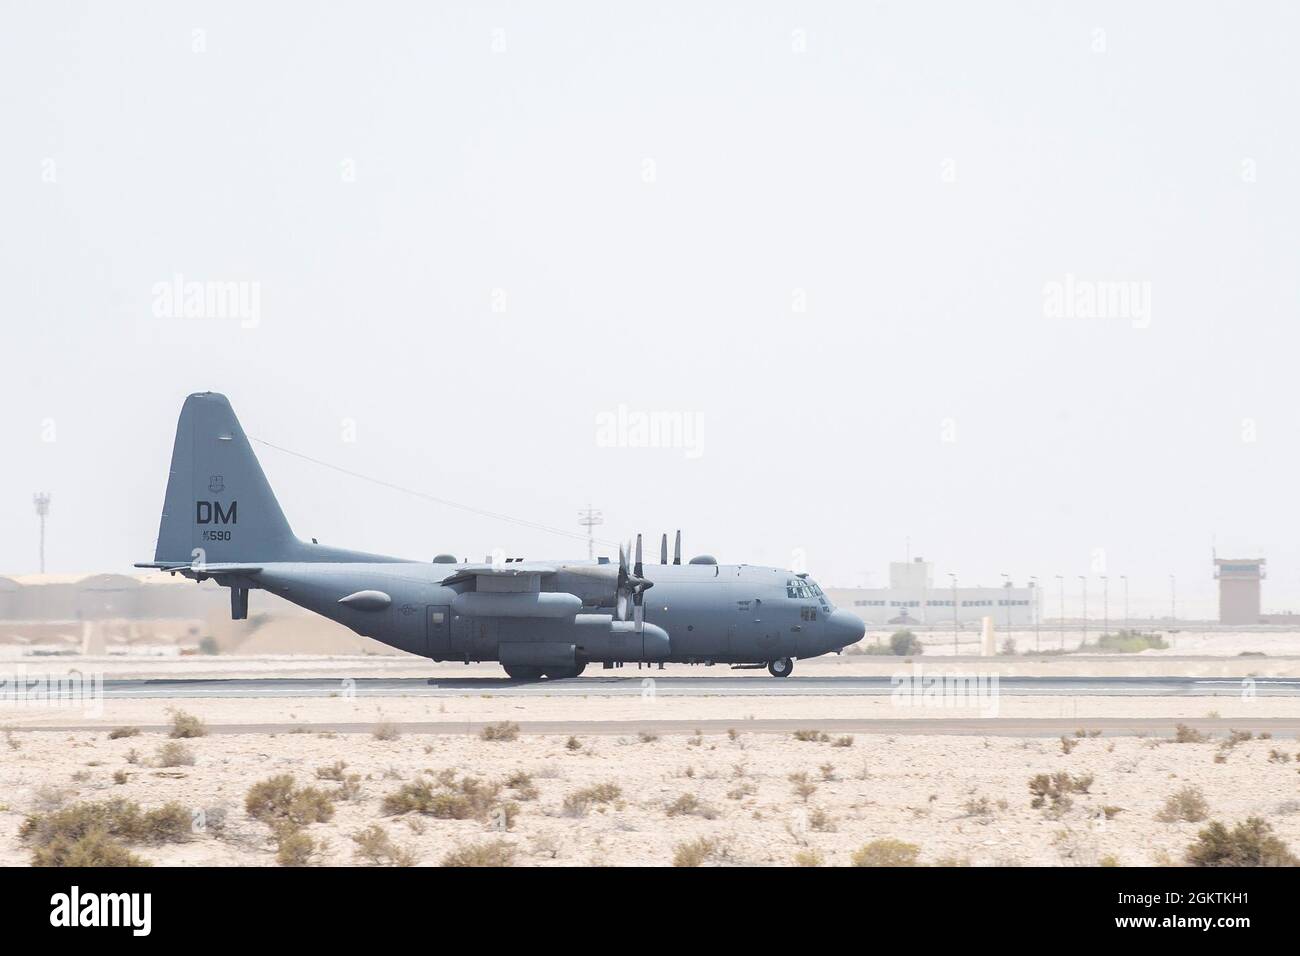 A U.S. Air Force EC-130 Compass Call aircraft, assigned to the 41st Expeditionary Electronic Combat Squadron, takes off in support of a joint, multi-national exercise at Al Dhafra Air Base (ADAB), United Arab Emirates, June 30, 2021. During the exercises, multiple platforms worked together to execute and refine tactics, techniques and procedures to counter Unmanned Aerial System threats. Conducting consistent training with partner nations ensures interoperability and the ability to defend ourselves, and reinforces security and stability in the region. Stock Photo